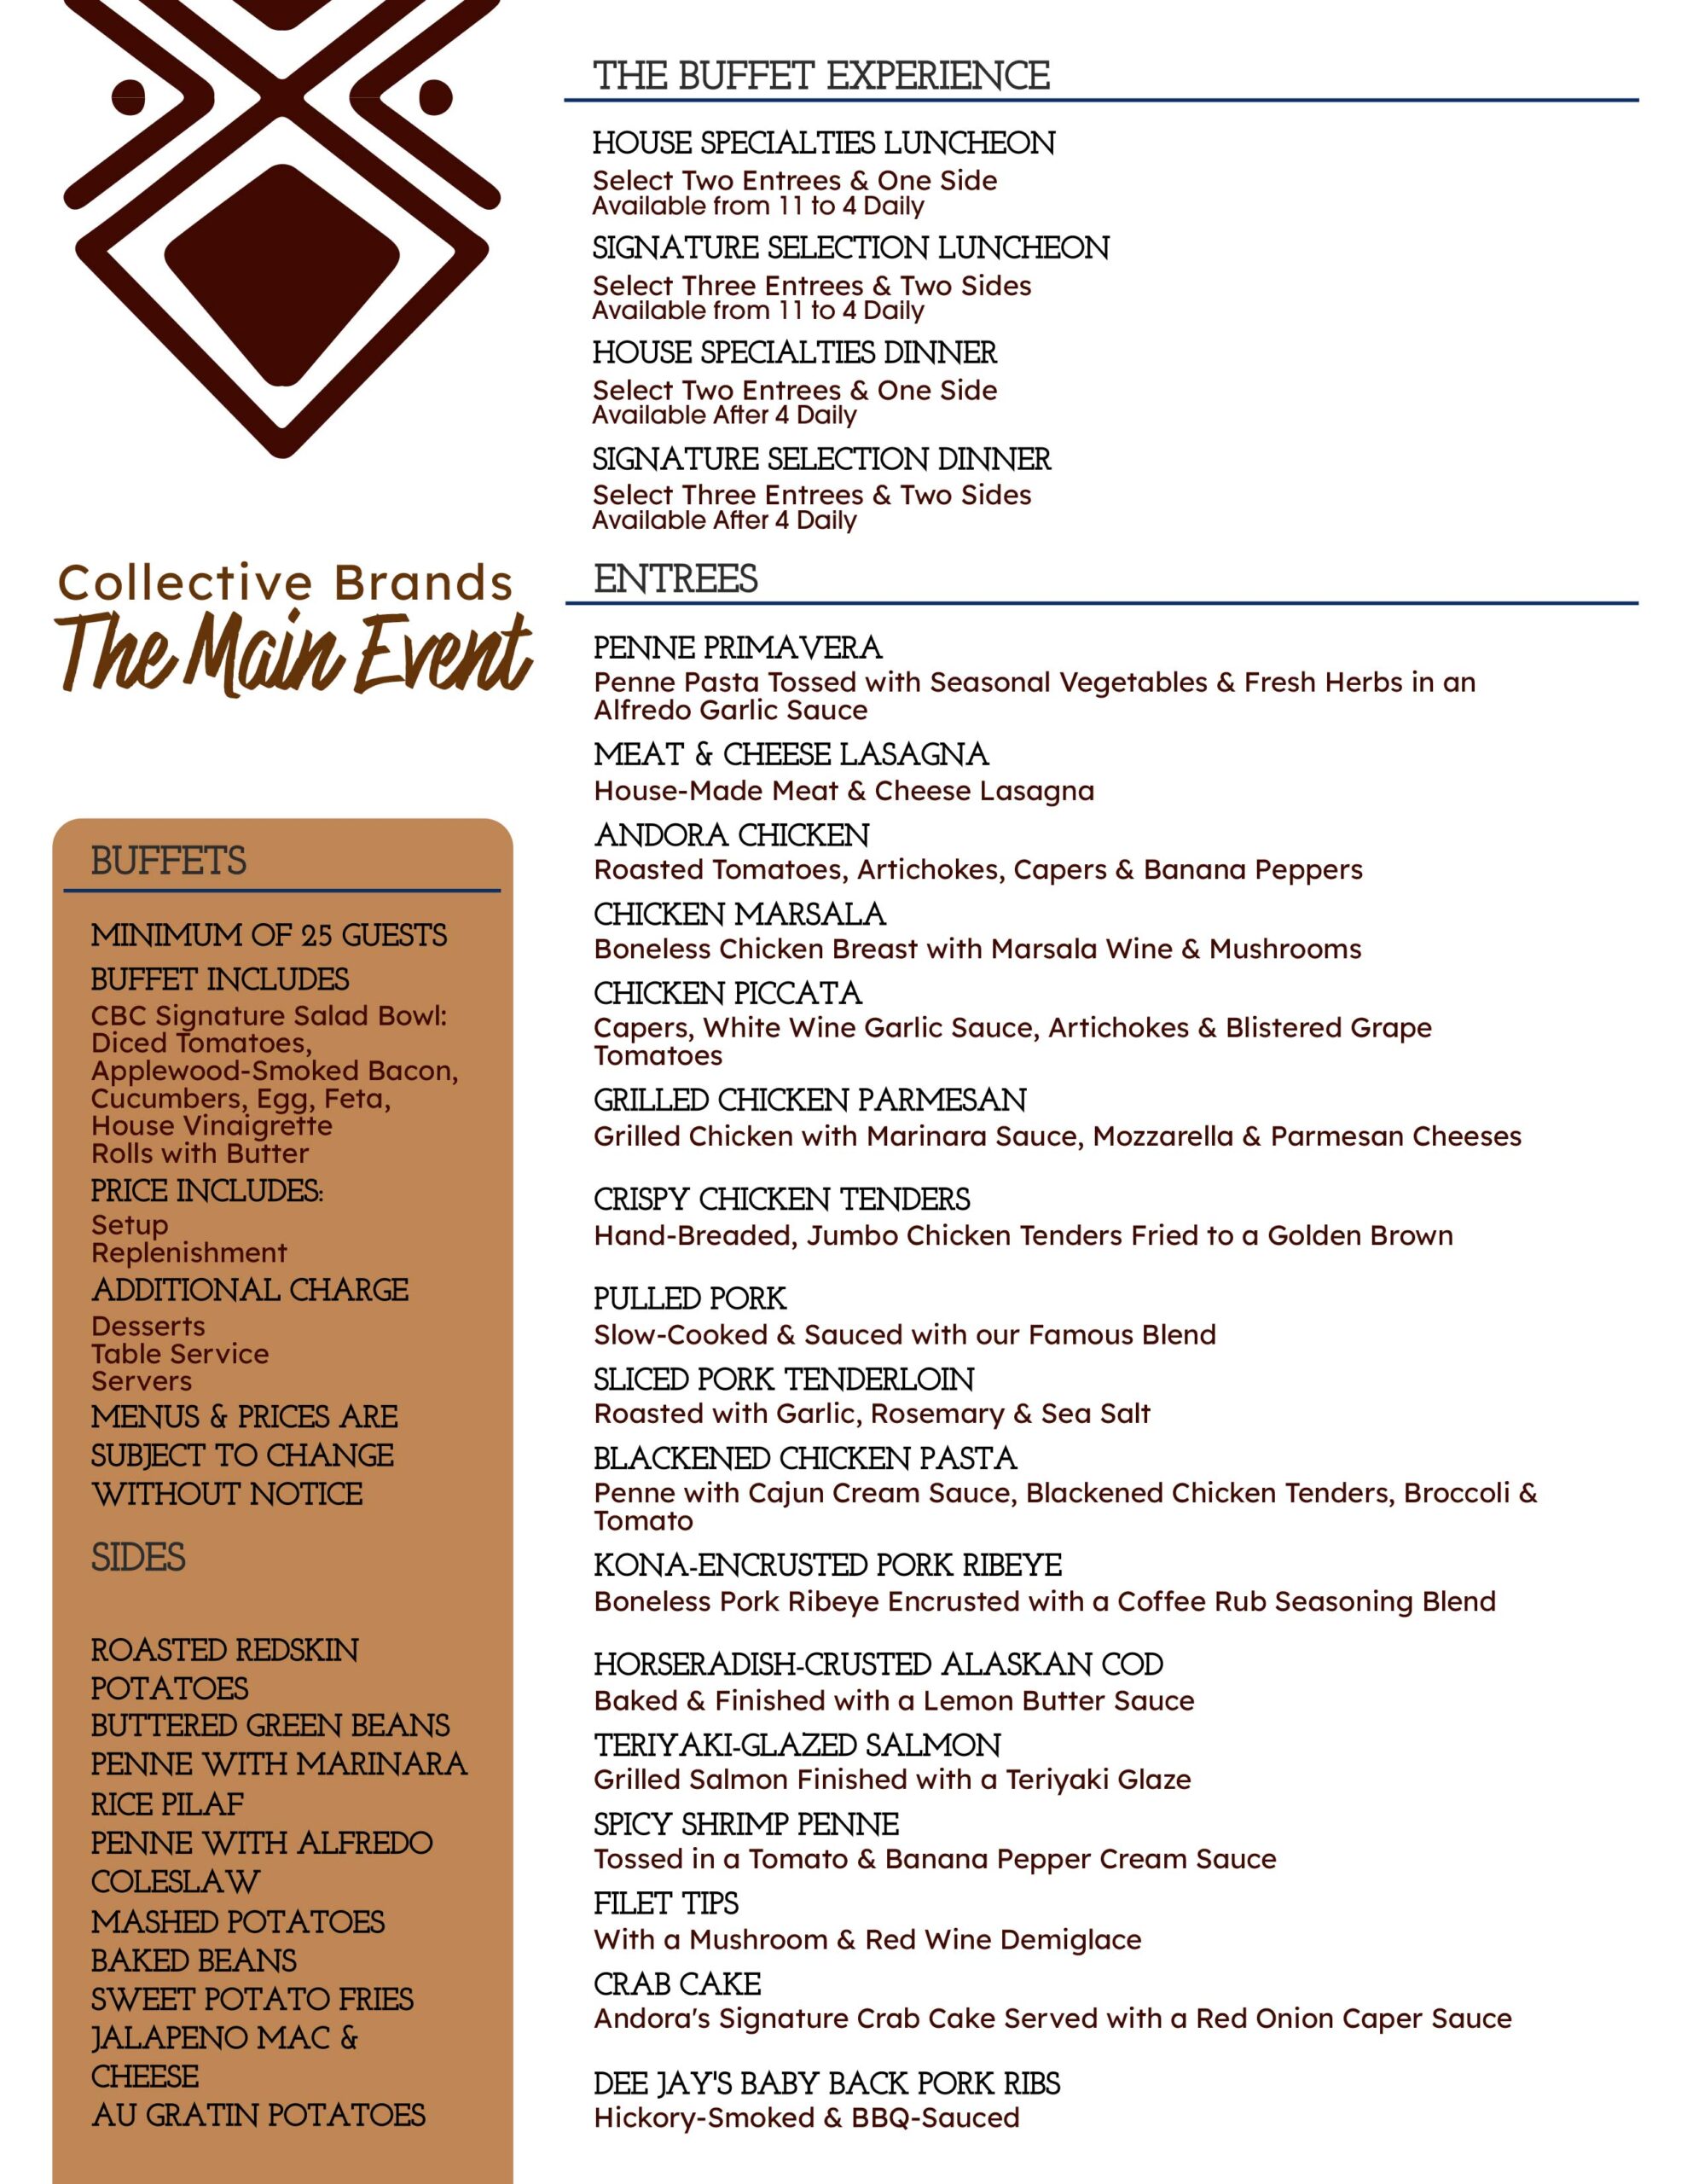 Page 2 of Collective Brands Catering menu for social events in Pennsylvania and West Virginia